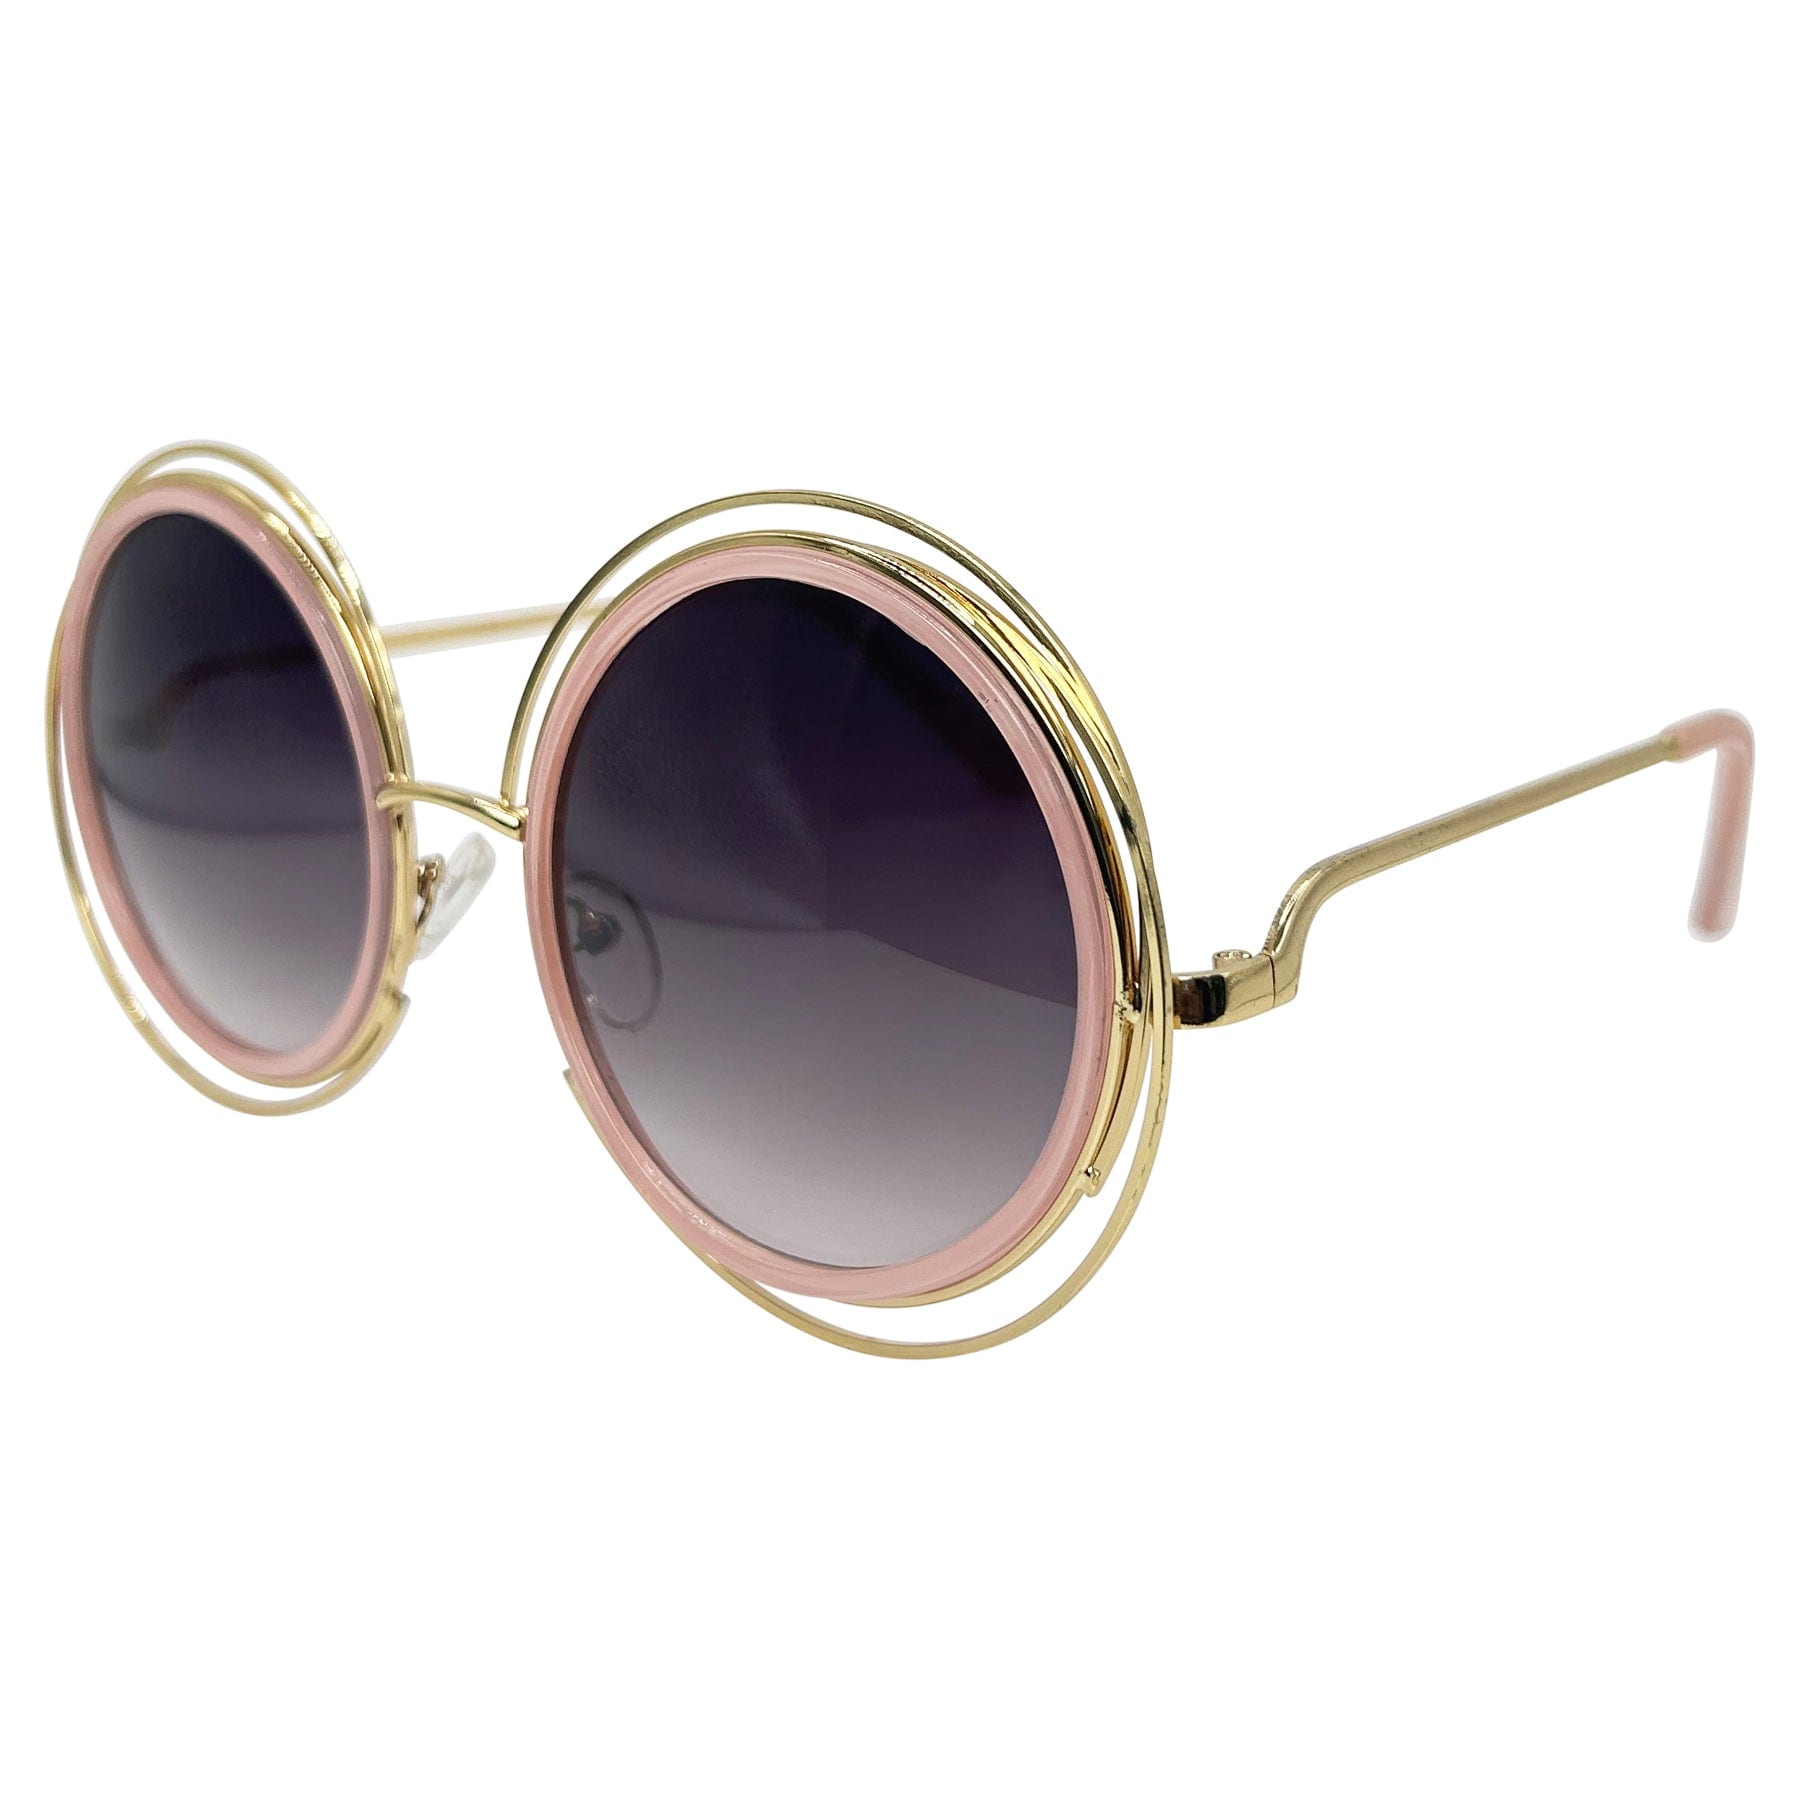 pink colorful sunglasses with a metal frame and smoke lens